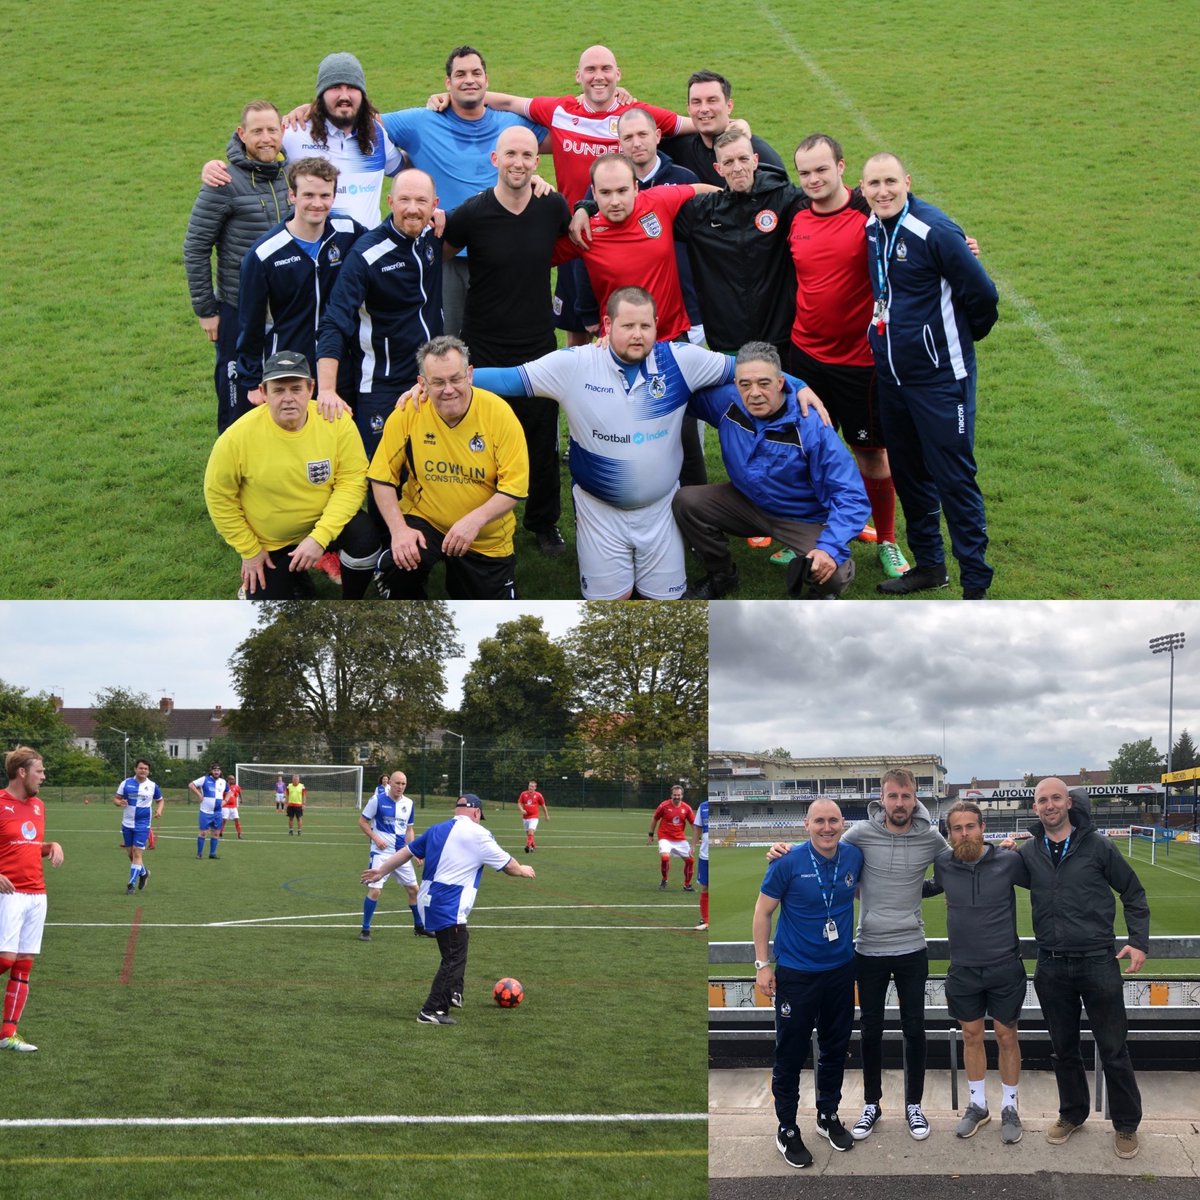 We've had a great 2019 & got the pleasure of meeting so many amazing people. Here's a few our 2019 highlights. #RecoveryThroughSport